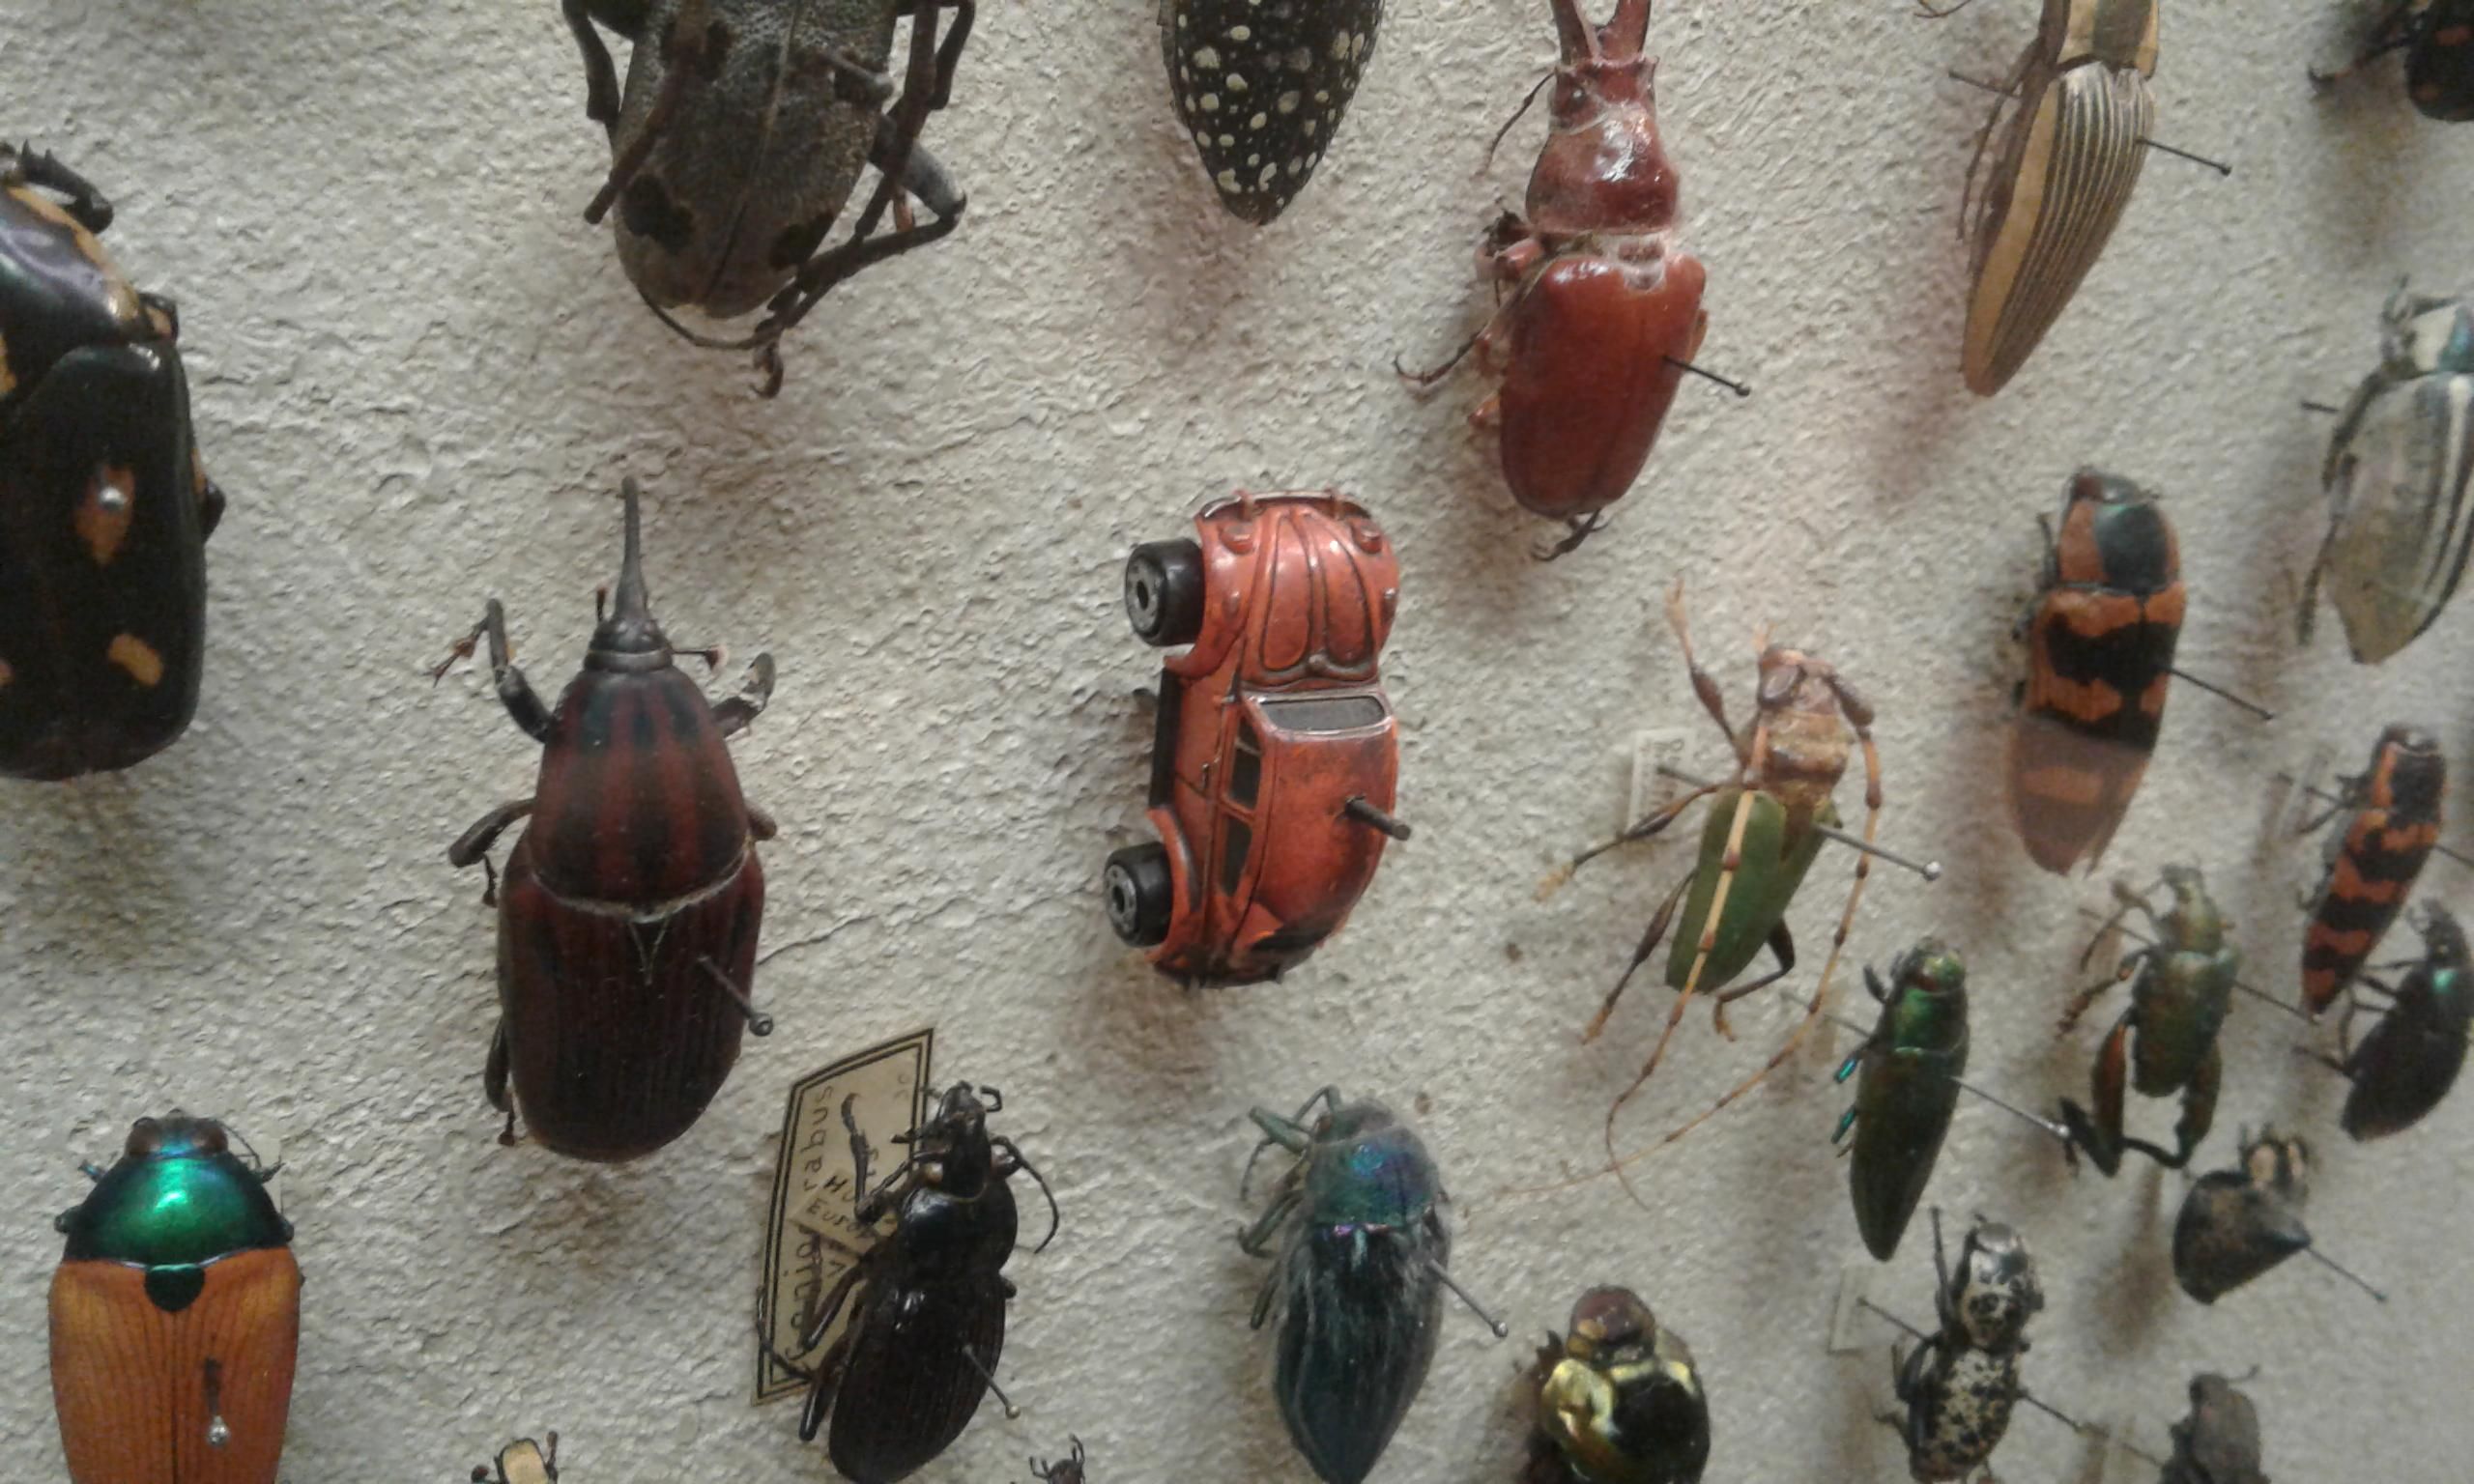 This beetle collection.